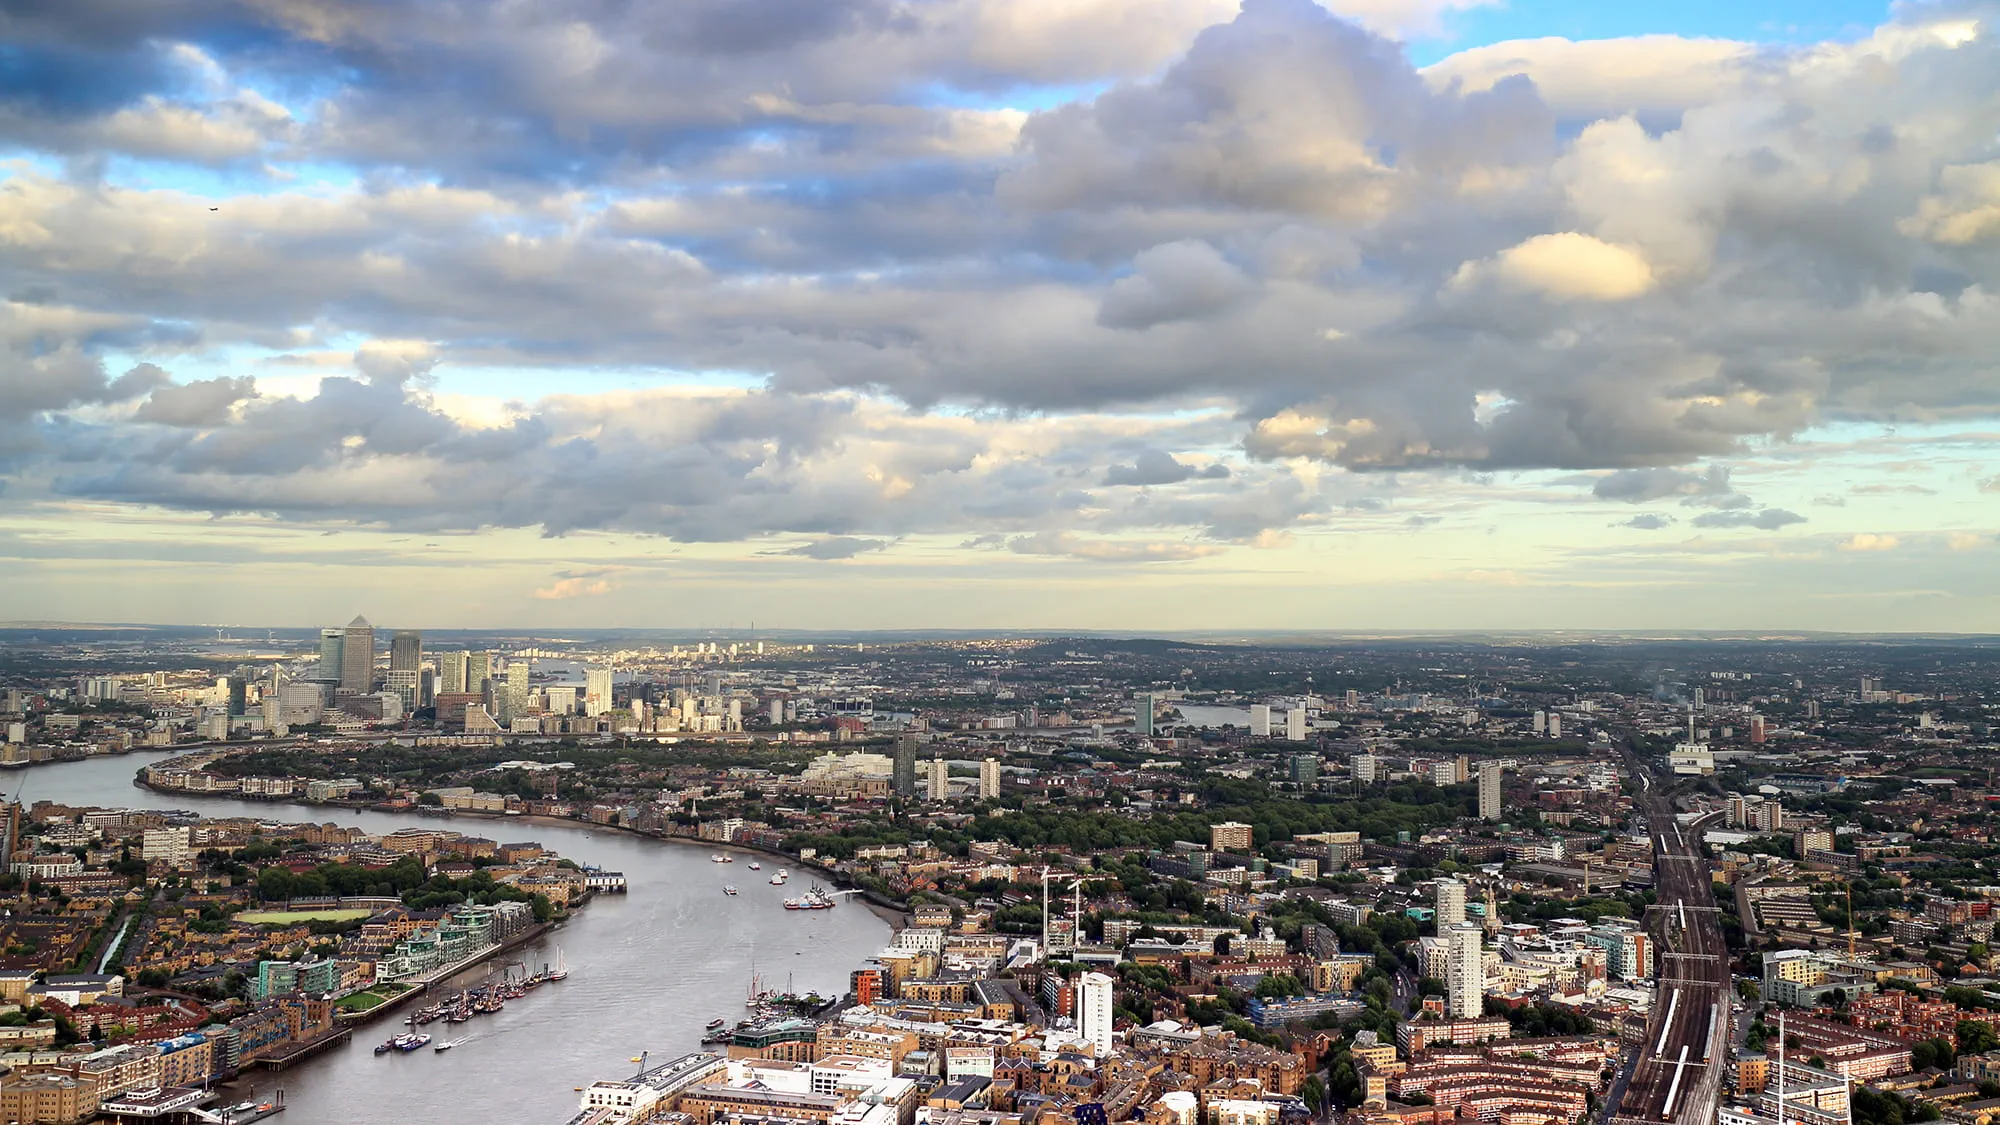 London Cityscape with Canary Wharf in the distance skyline